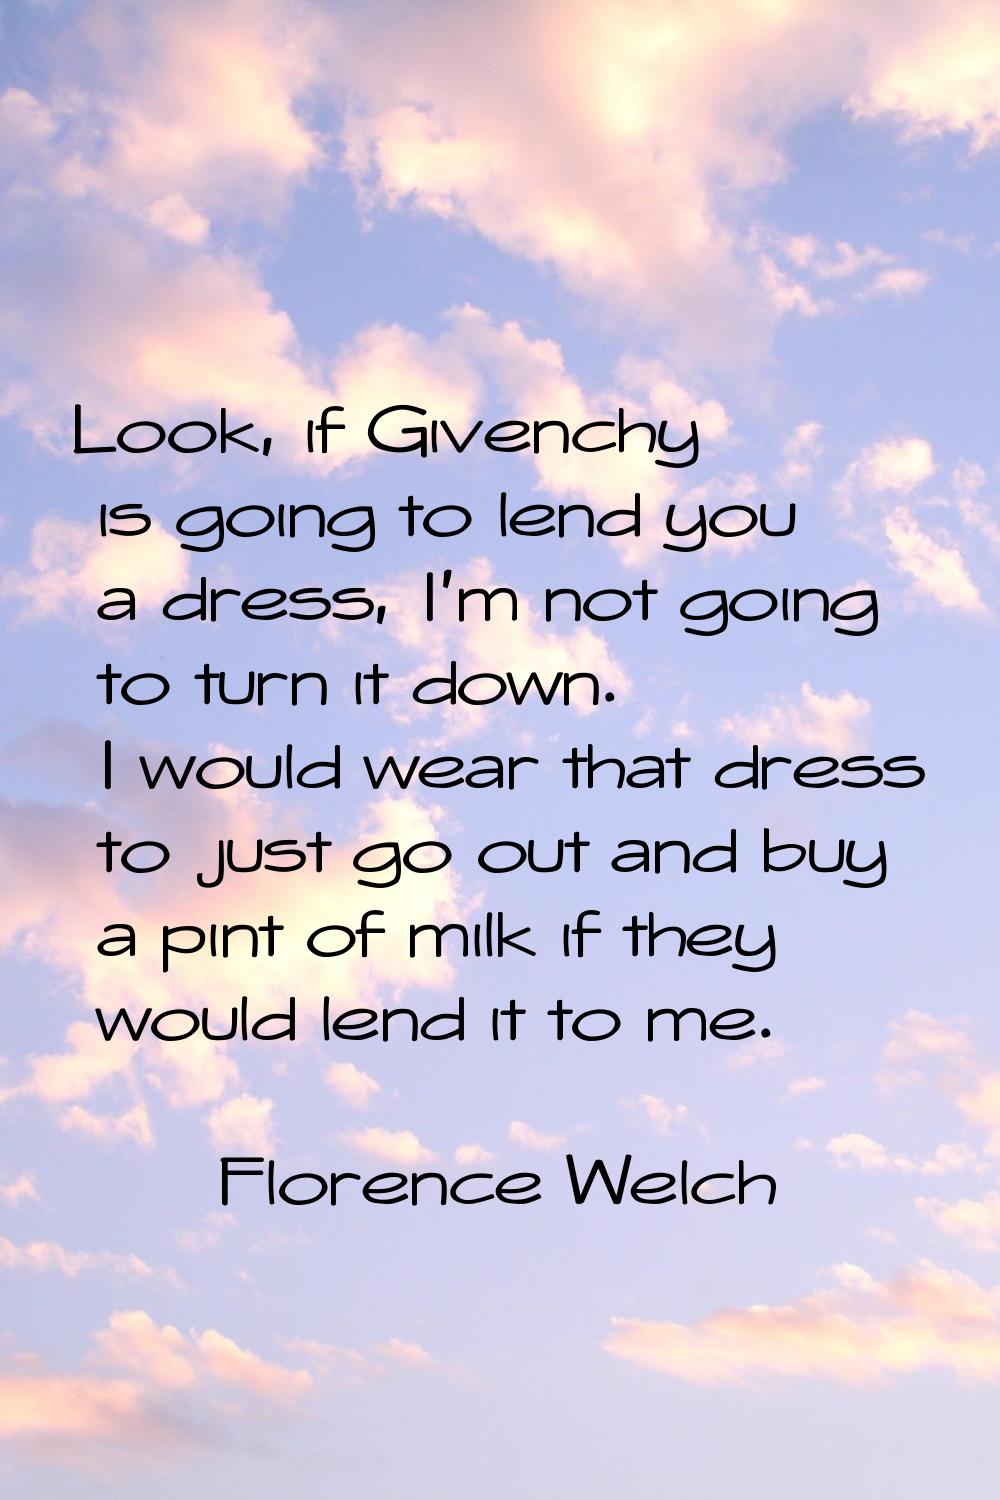 Look, if Givenchy is going to lend you a dress, I'm not going to turn it down. I would wear that dr